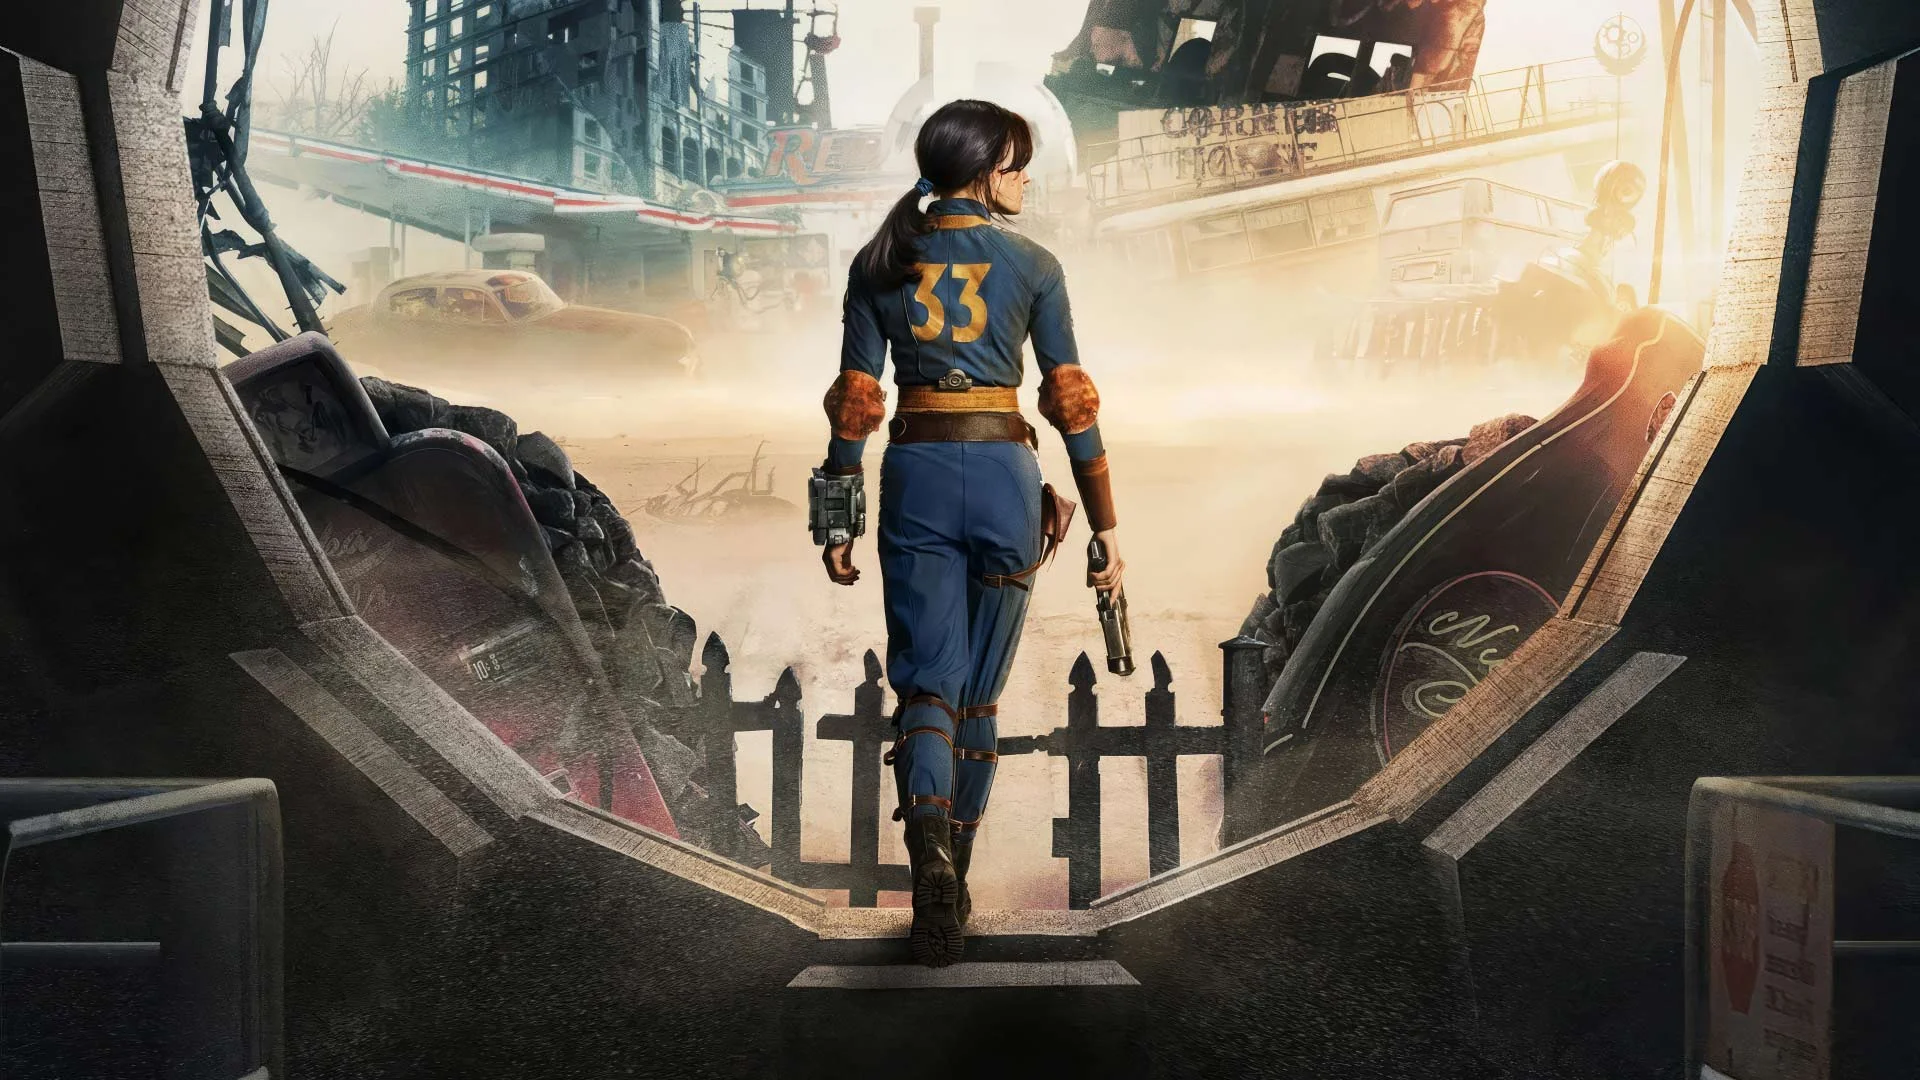 The upcoming Fallout series has got colorful posters